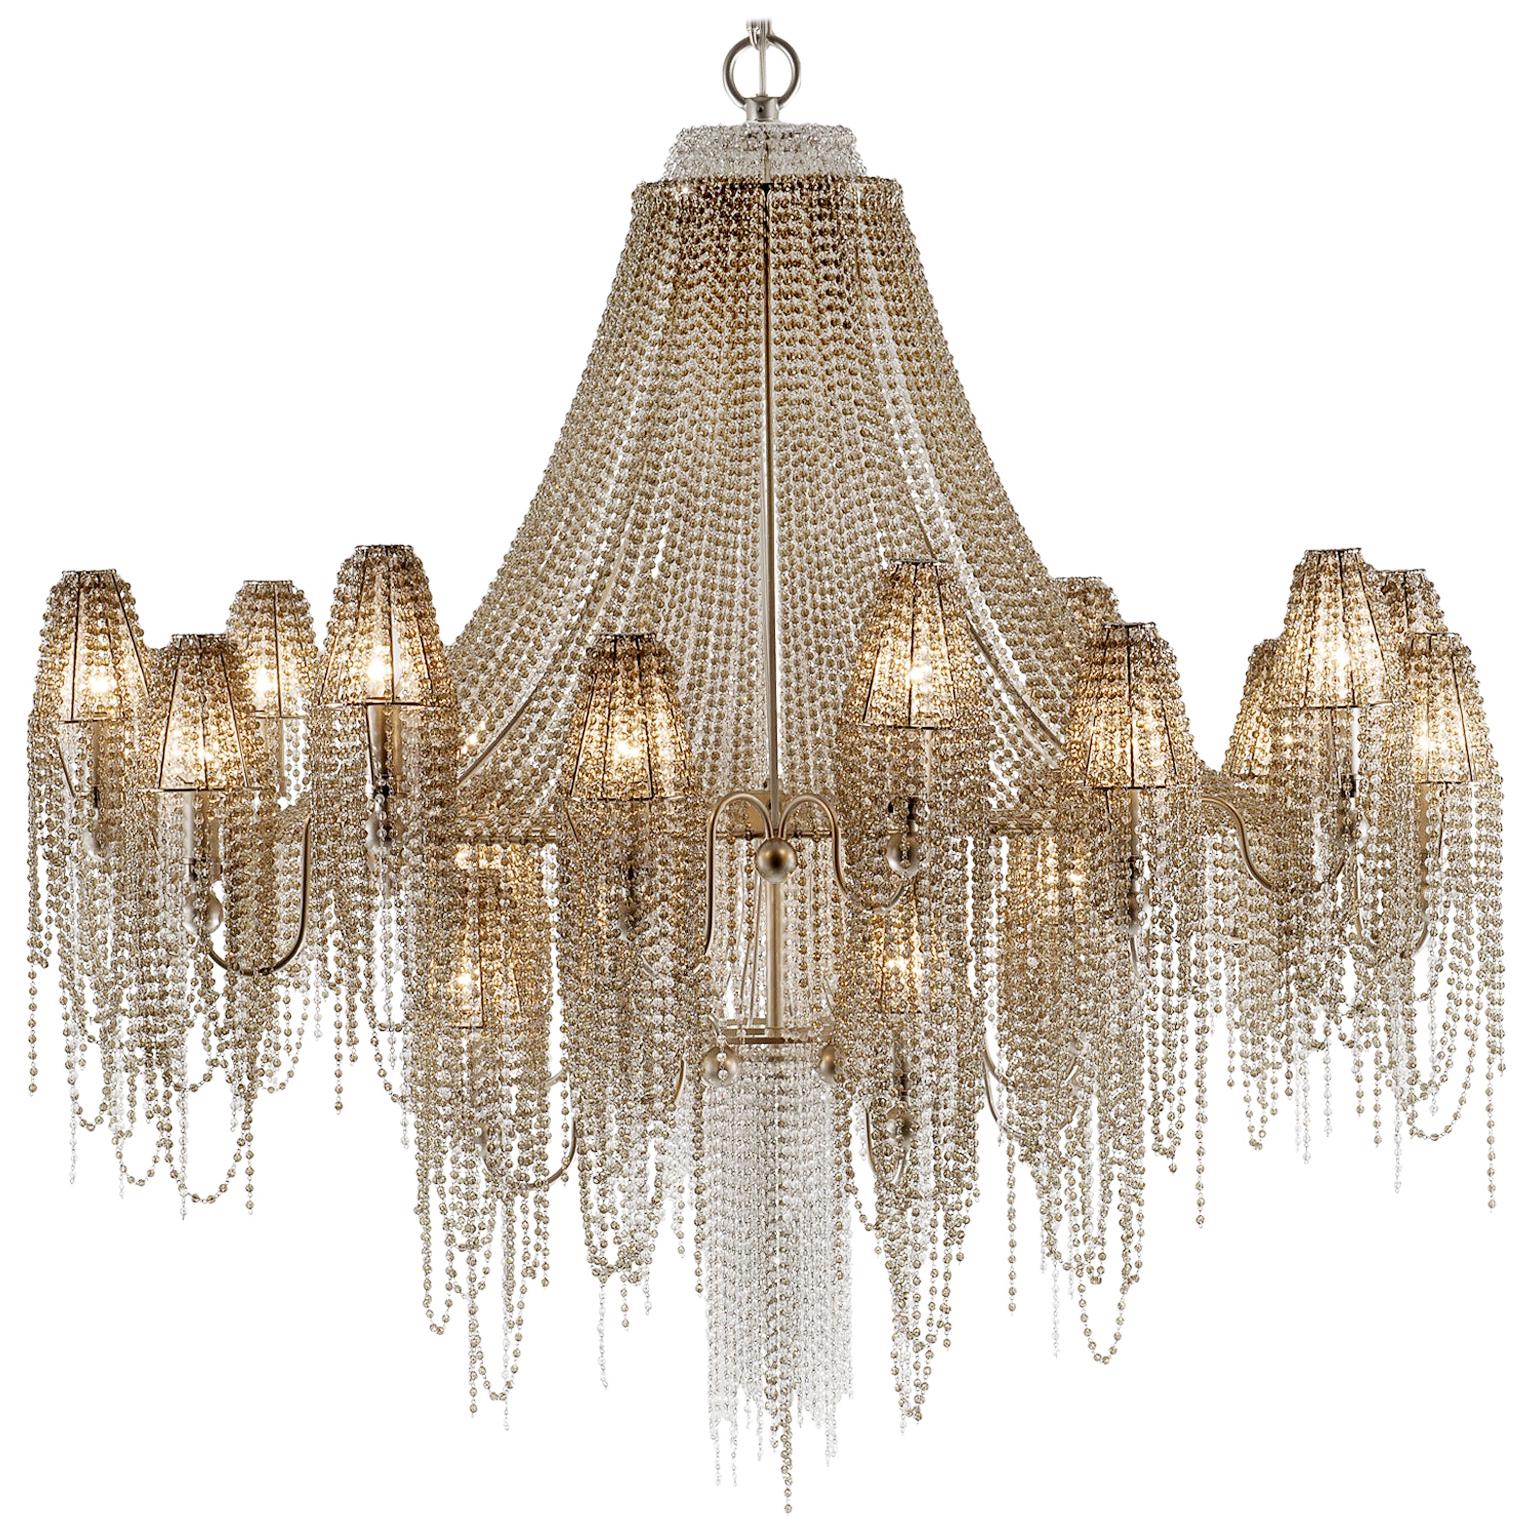 21st Century Burlesque Champagne Chandelier and Crystals by Patrizia Garganti For Sale